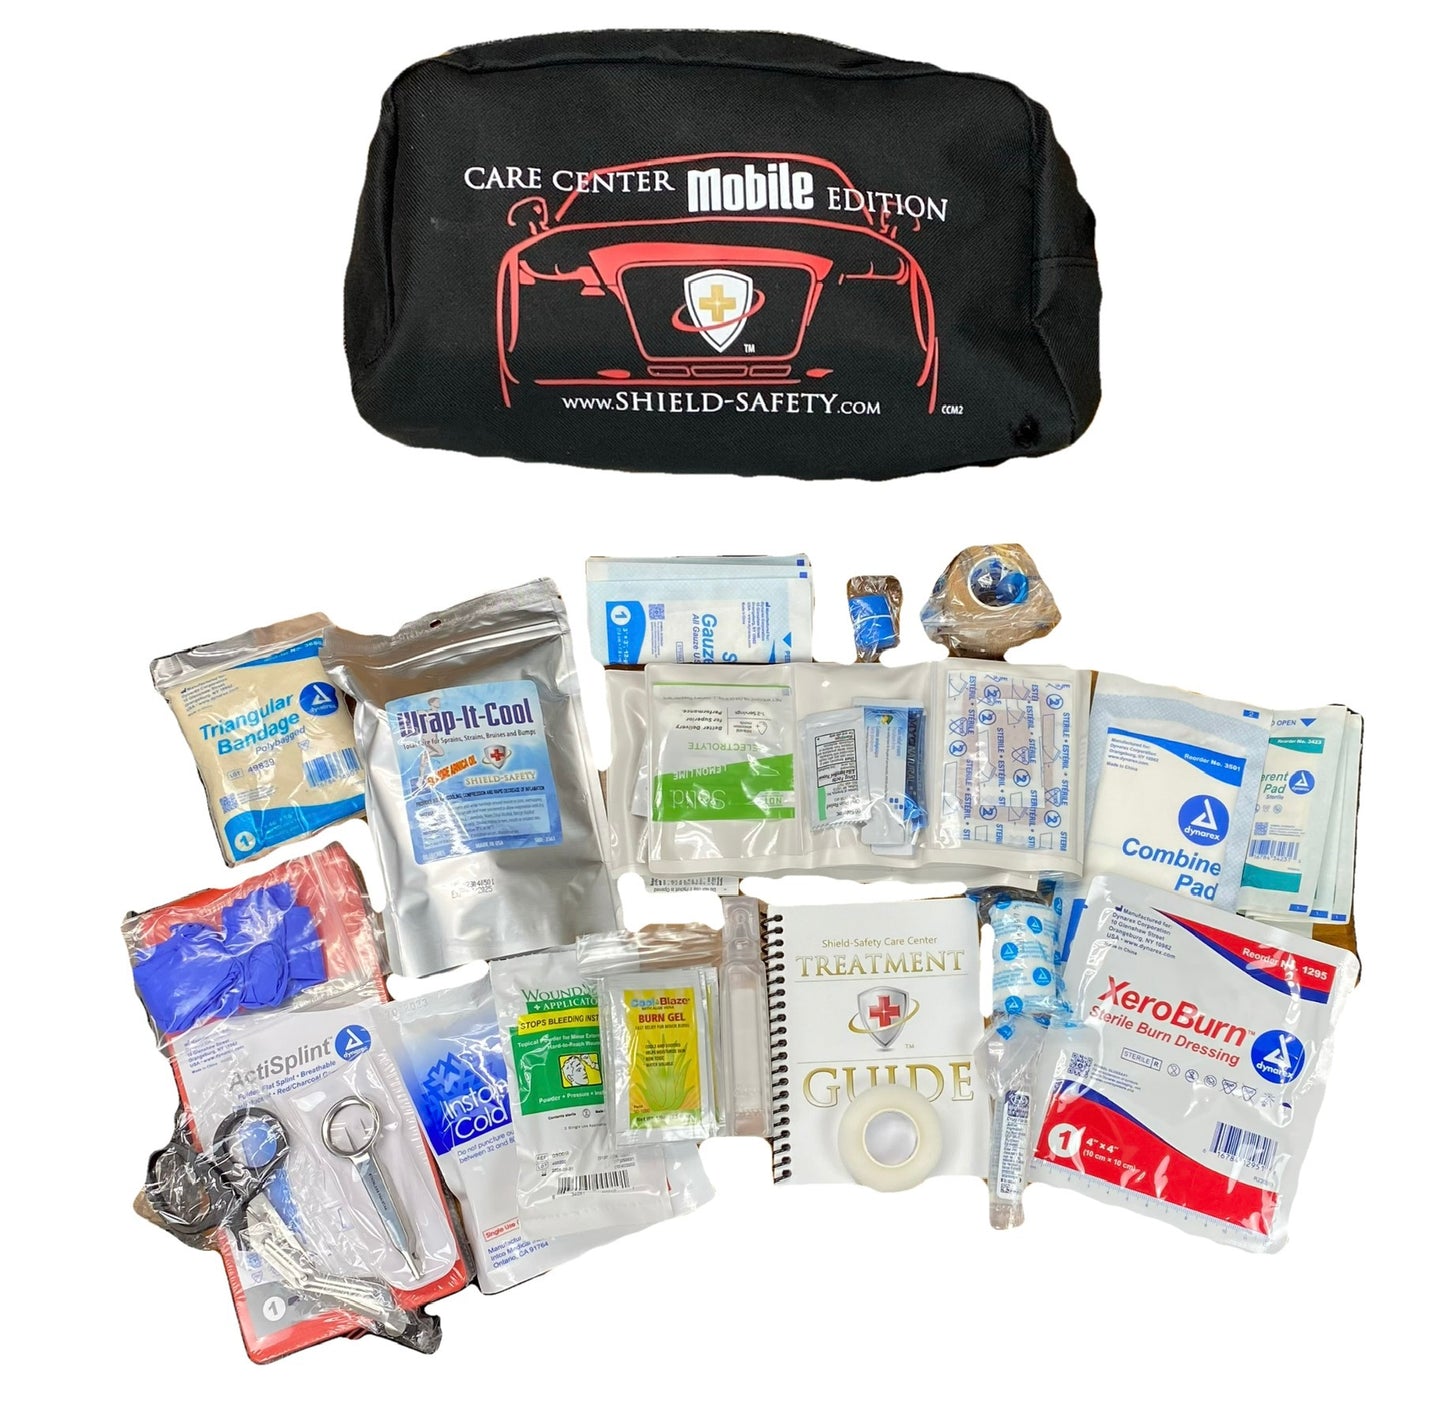 Mobile First Aid Kit Care Center Edition